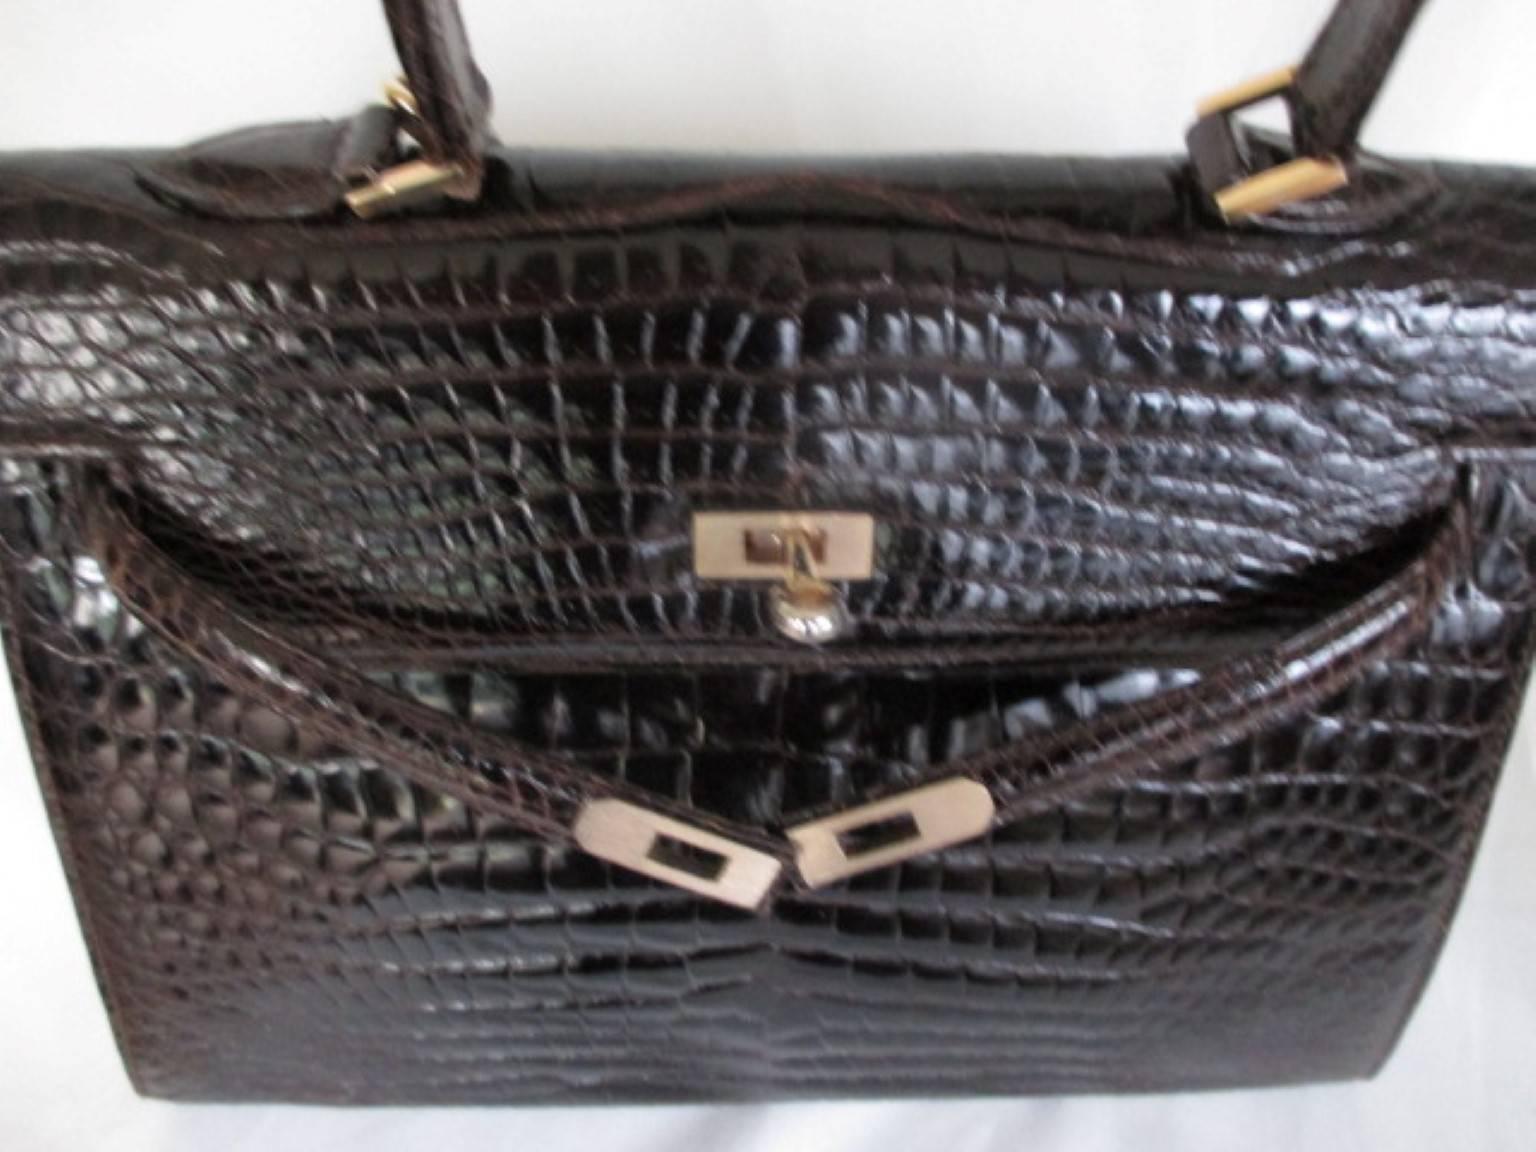 Exquisite rare vintage kelly style handbag made of quality crocodile leather with gold hardware.
It's in preloved vintage condition and comes only with a lock (no key).
Inside is leather with 1 zipper pocket and 1 open pocket.
Slight signs of